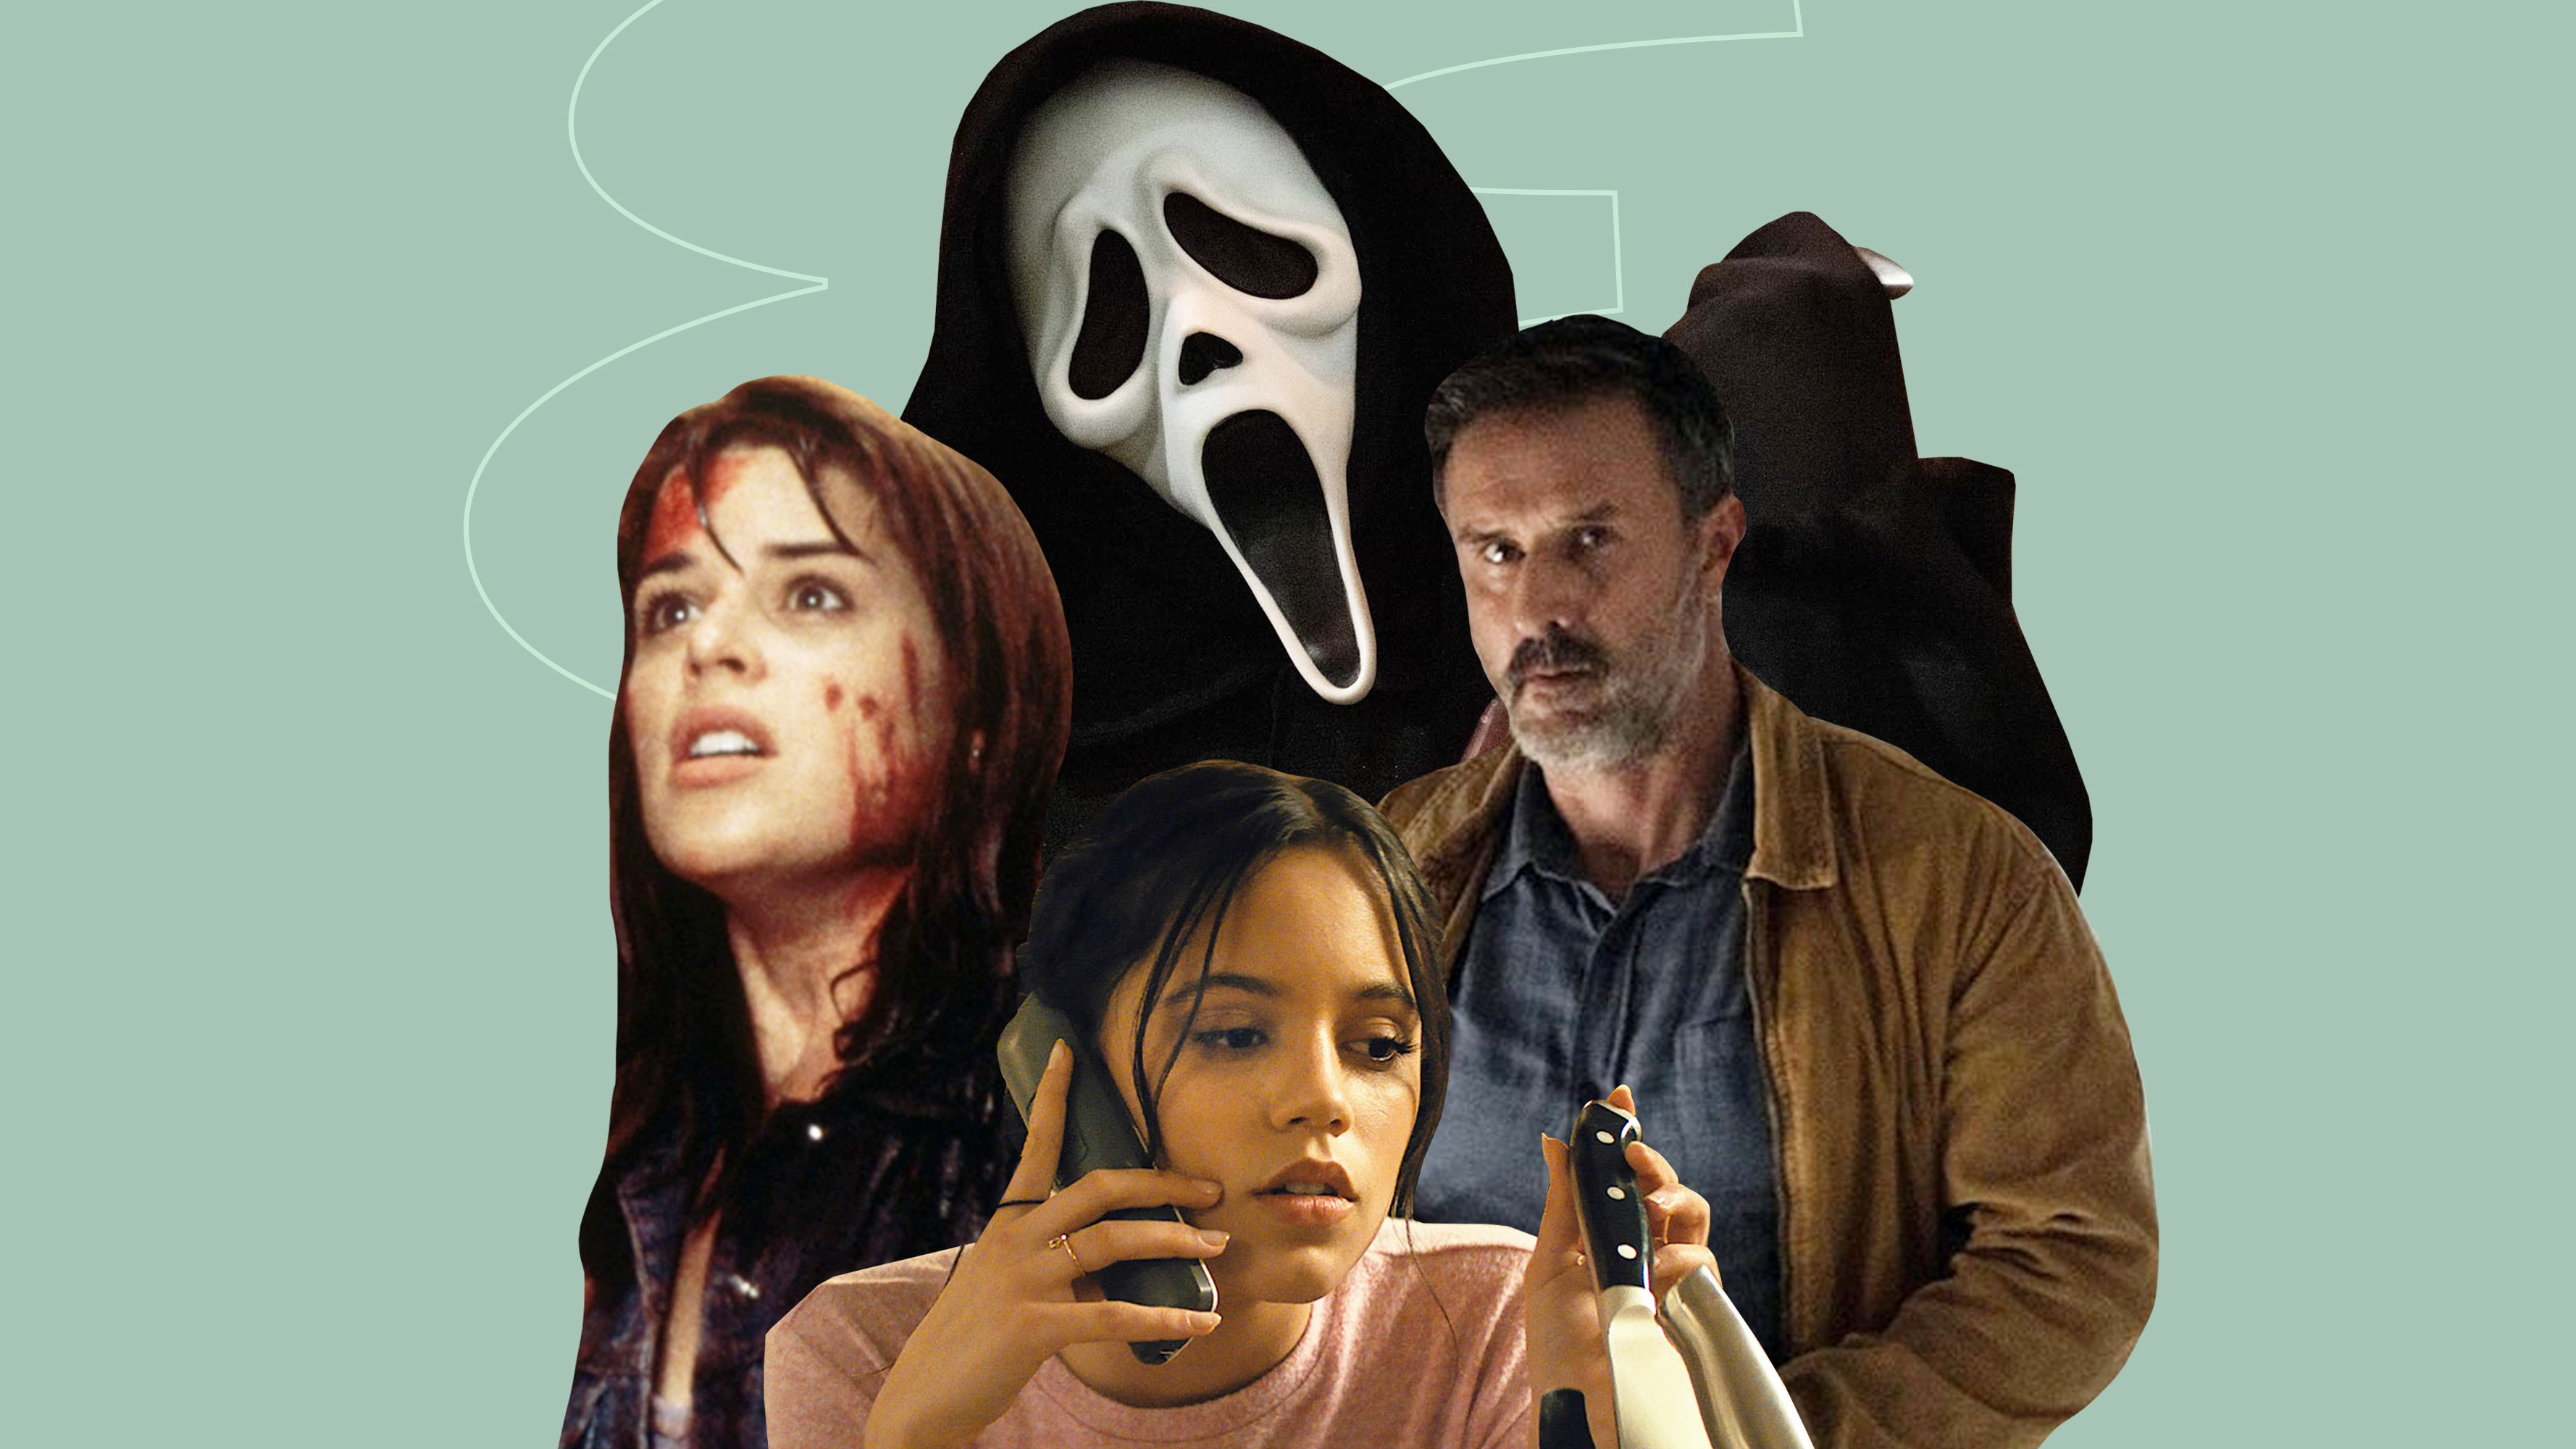 Scream 6: Cast, Trailer, Release Date, and Everything We Know So Far